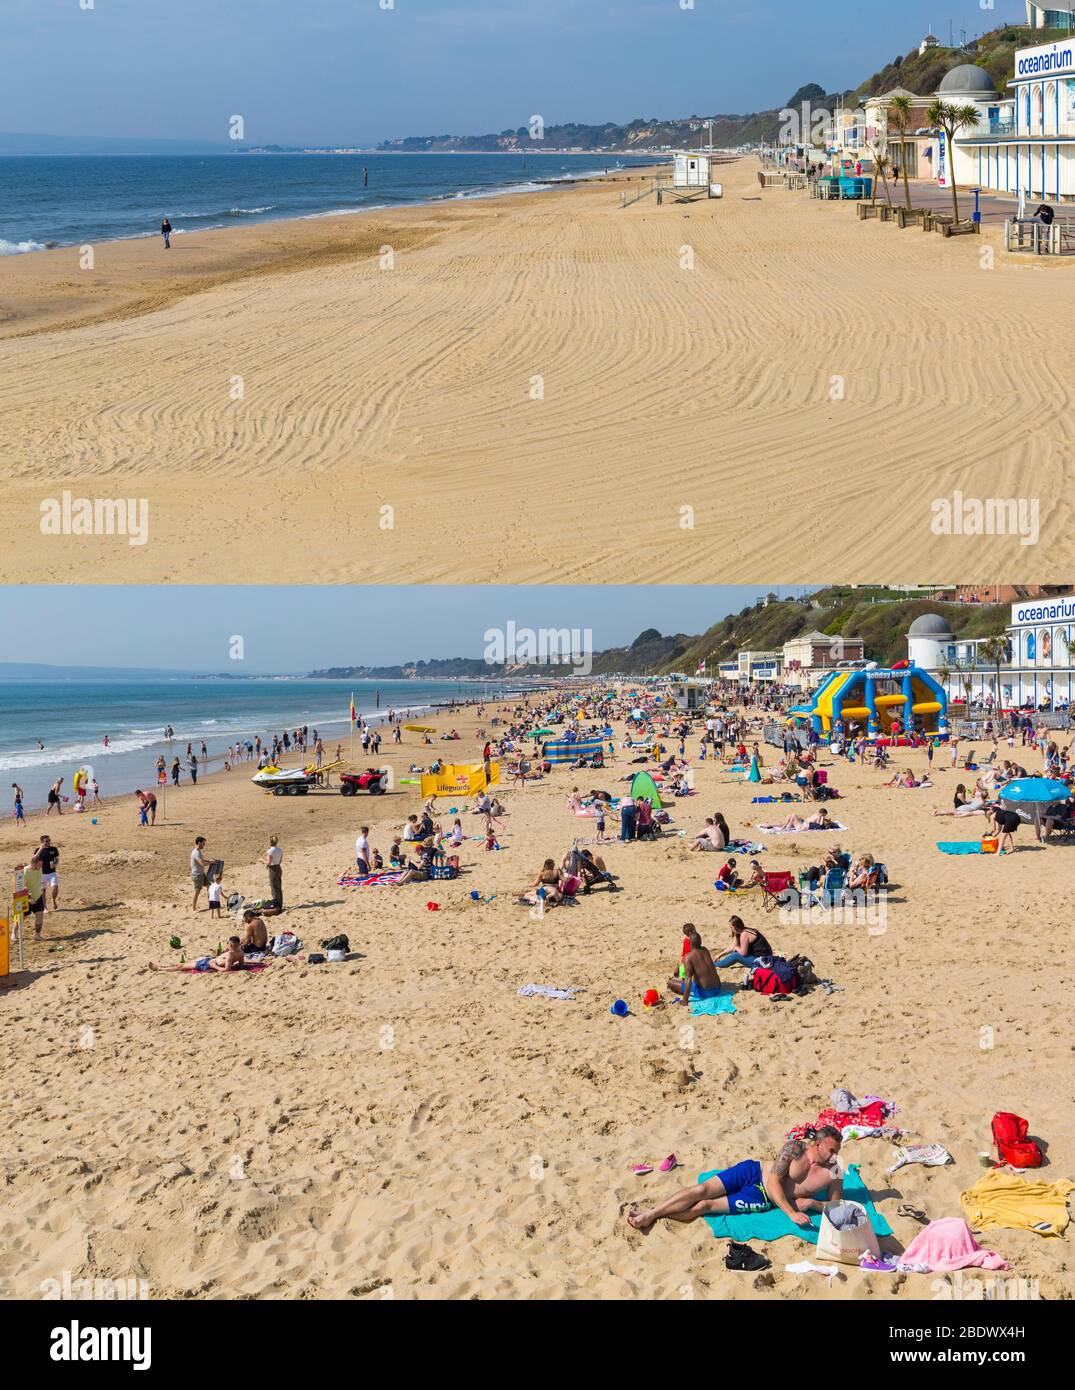 Bournemouth, Dorset, UK. 10th Apr 2020. UK weather: composite image showing difference between Easter Good Friday 2019 (bottom) with packed beaches on a hot and sunny day as visitors flocked to the seaside on 19th April 2019 and Easter Good Friday 2020 (top) with empty beaches because of Coronavirus restrictions on lockdown with people only permitted to take their daily exercise. comparing contrasting contrast comparison. Credit: Carolyn Jenkins/Alamy Live News Stock Photo